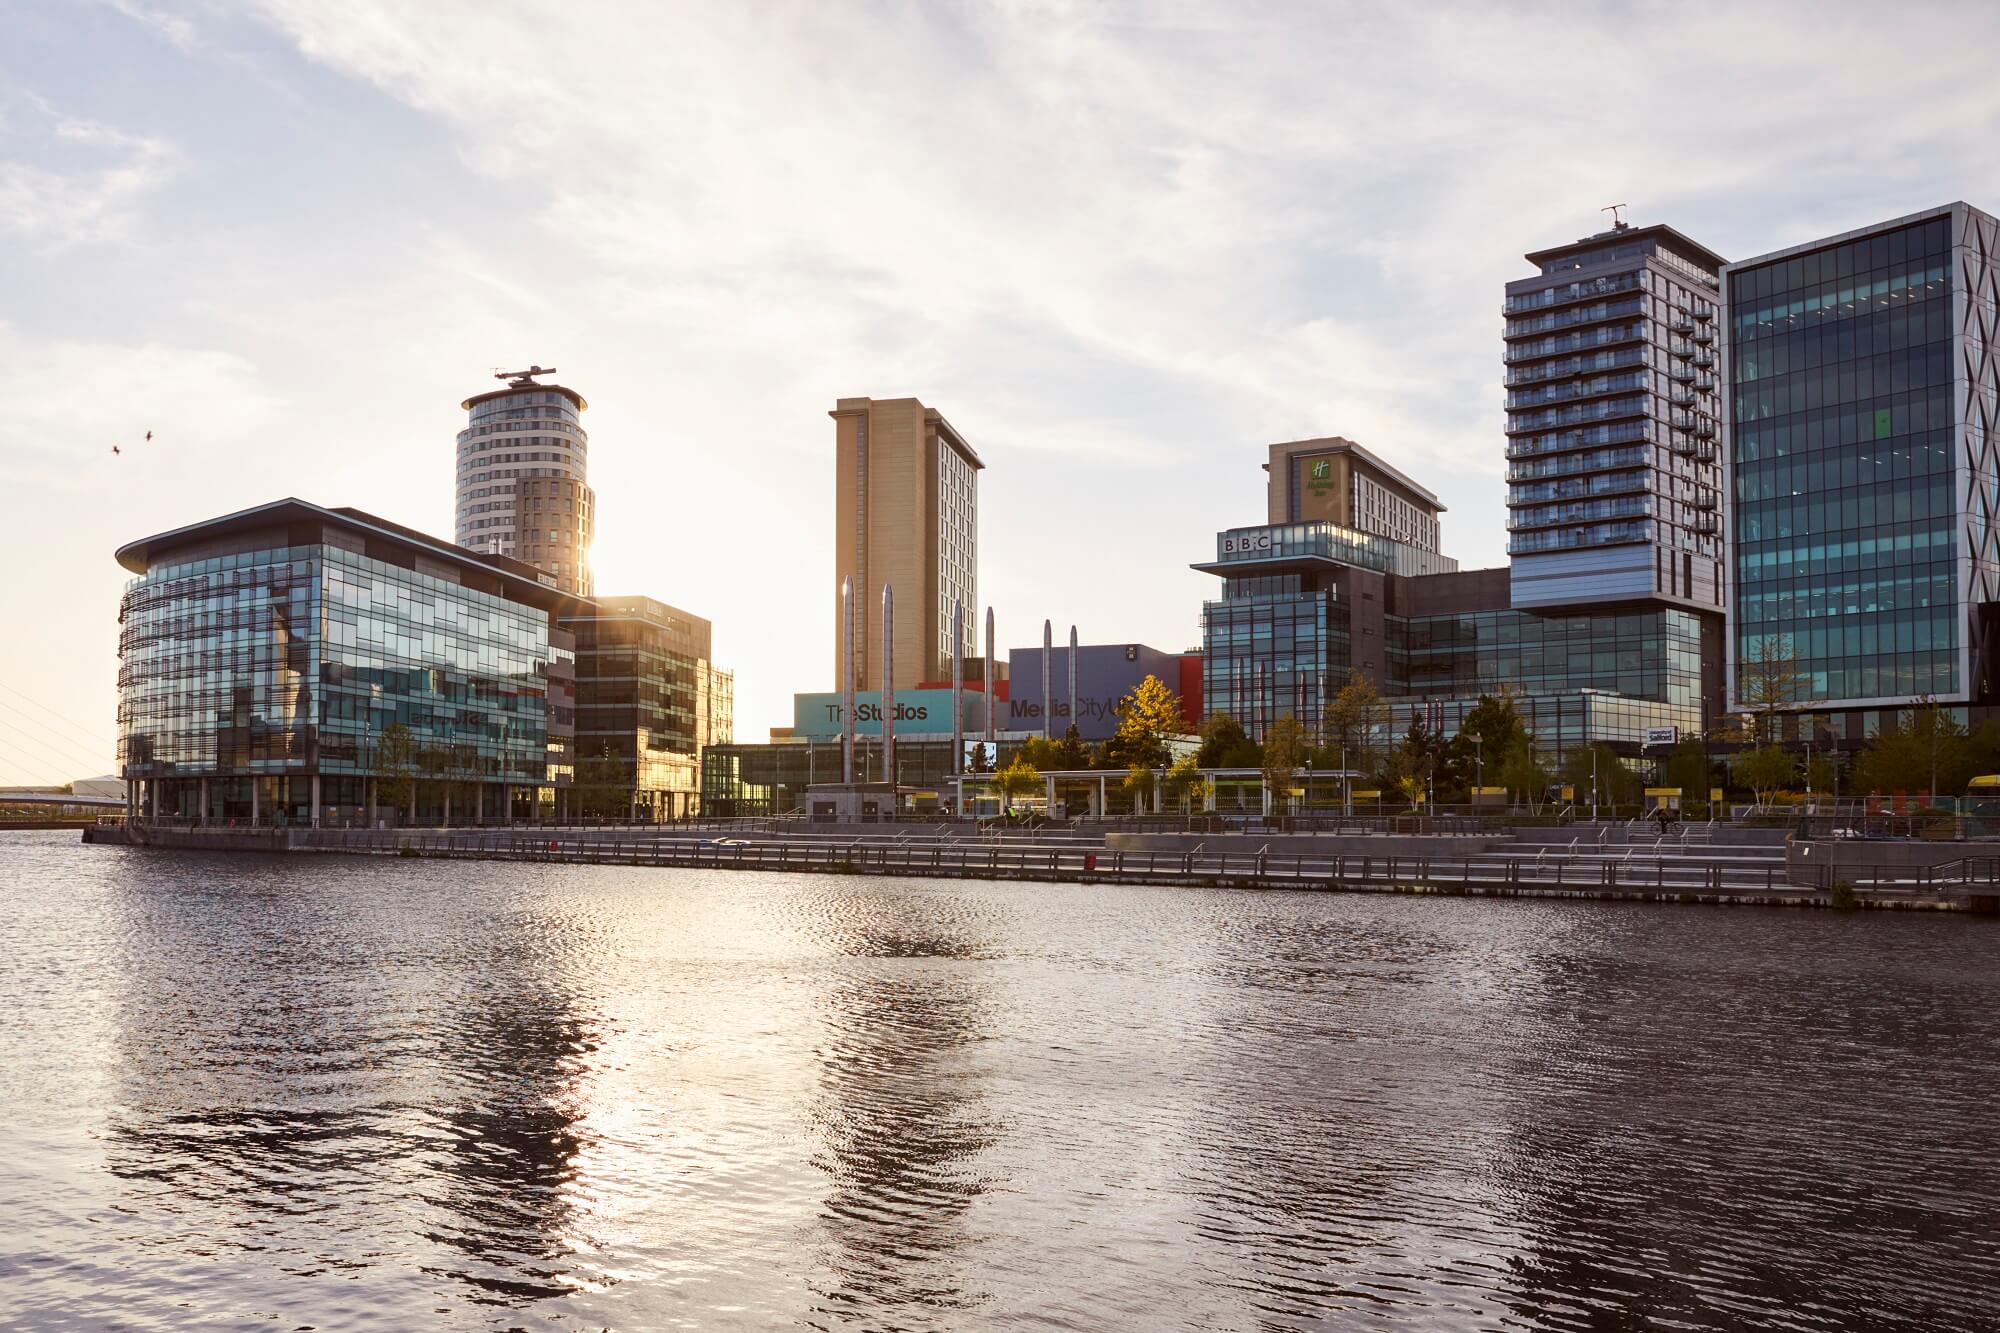 Media City Buildings In Manchester